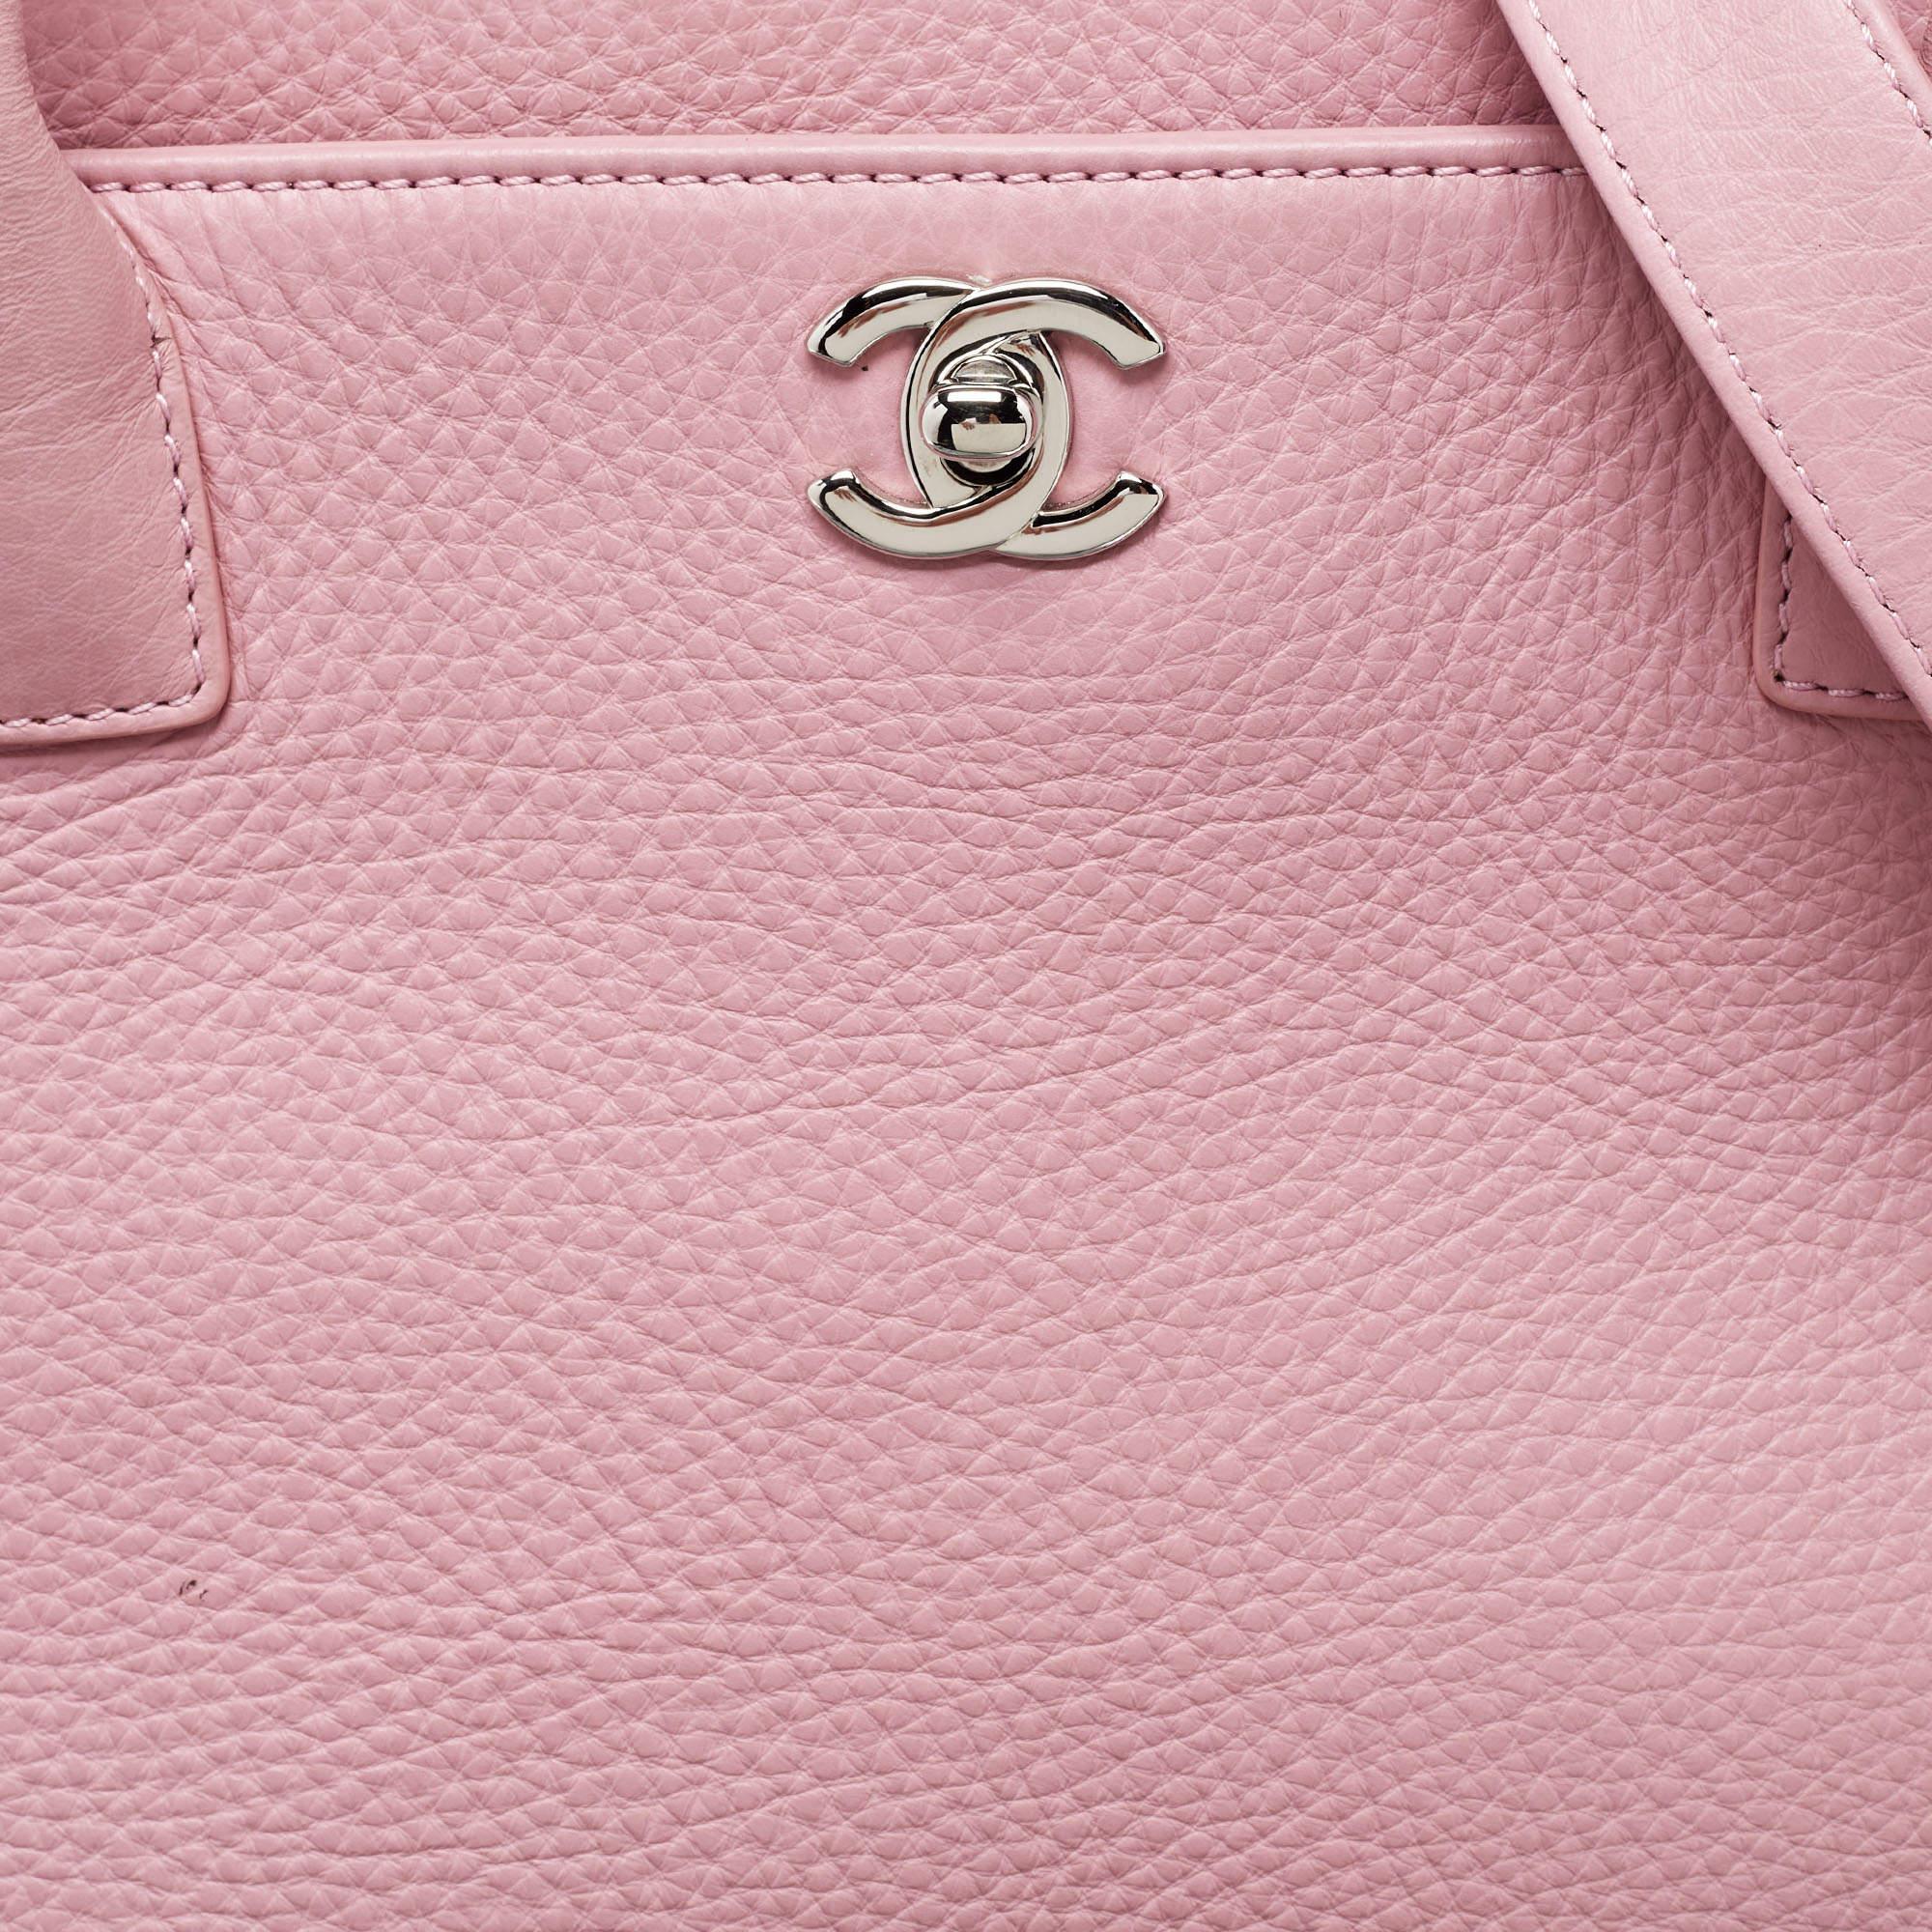 Chanel Pink Leather Executive Cerf Tote For Sale 5